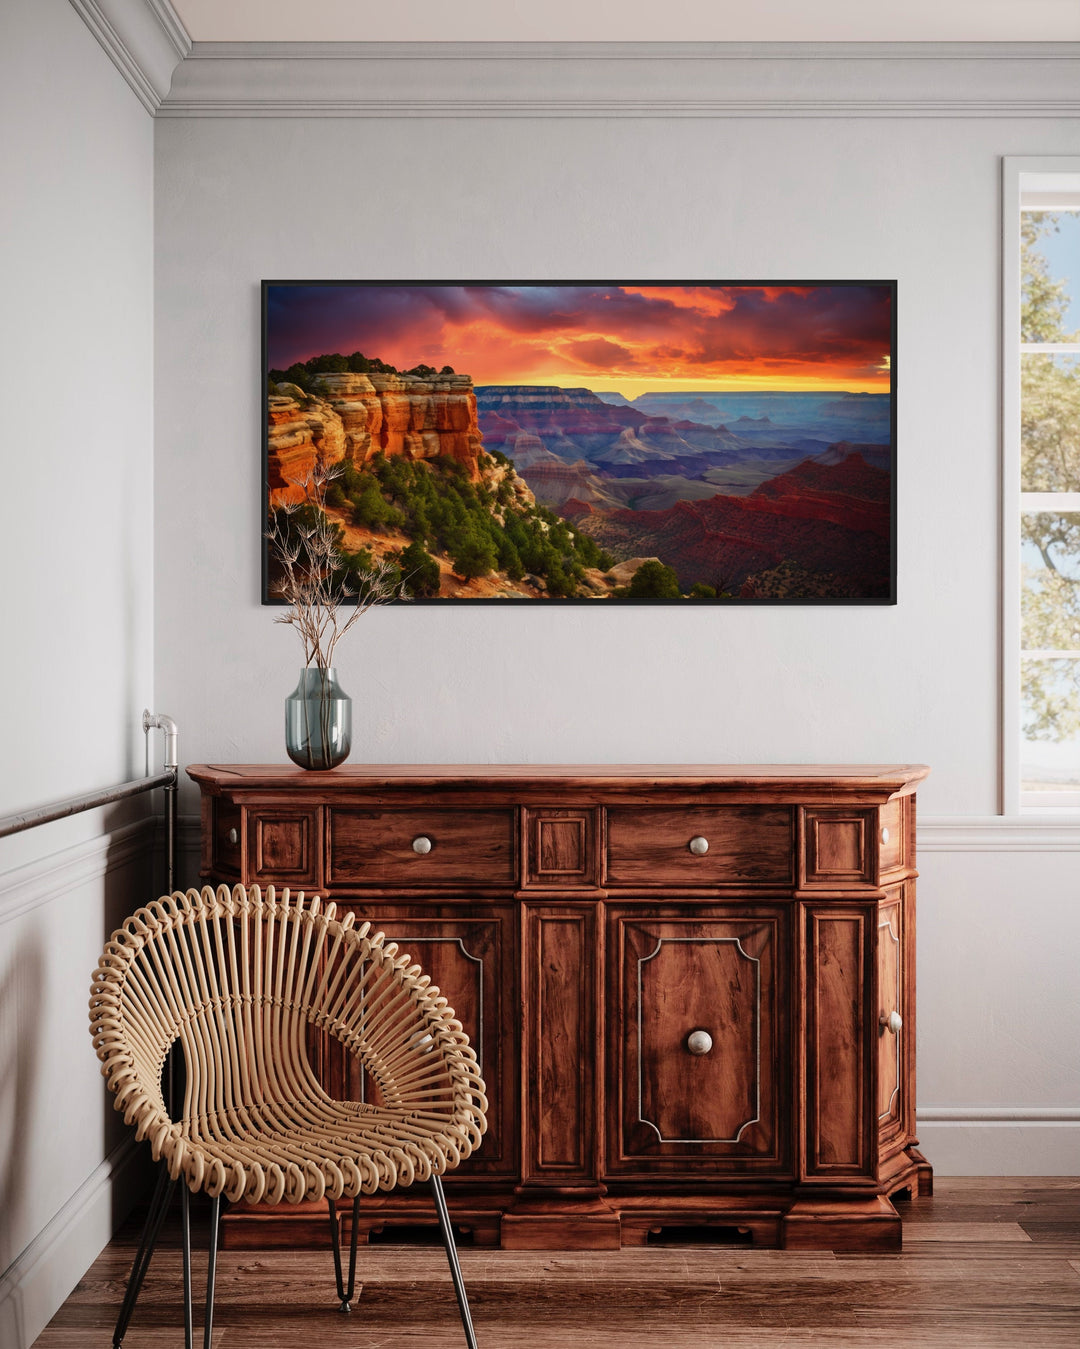 Grand Canyon Sunset Photo Framed Canvas Wall Art in bedroom